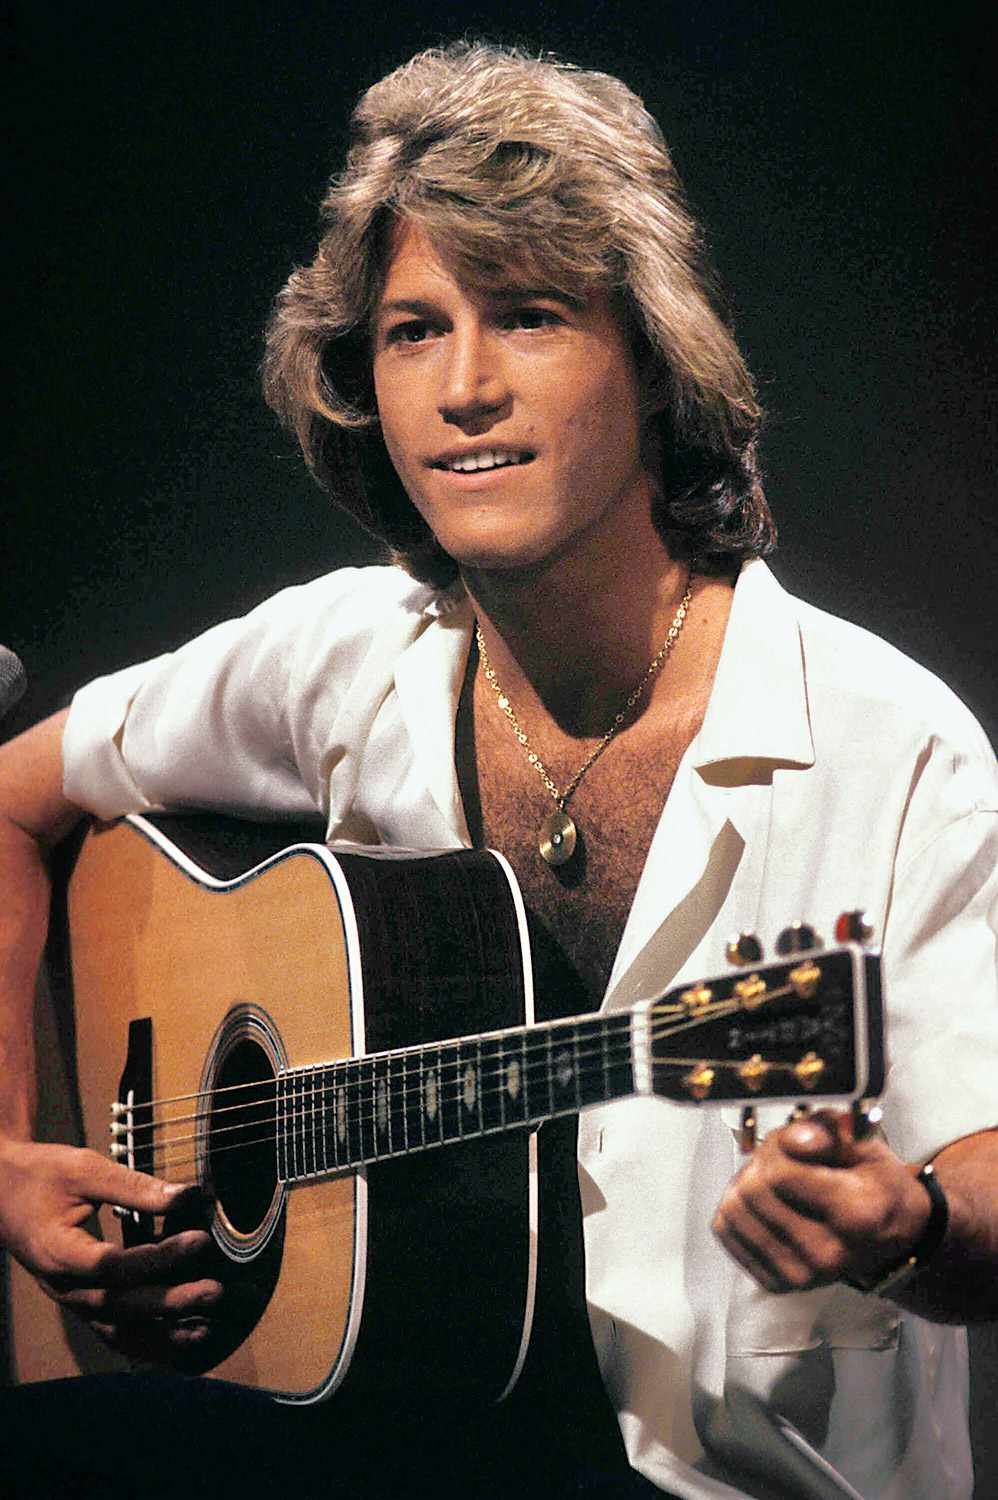 How did Andy Gibb die?